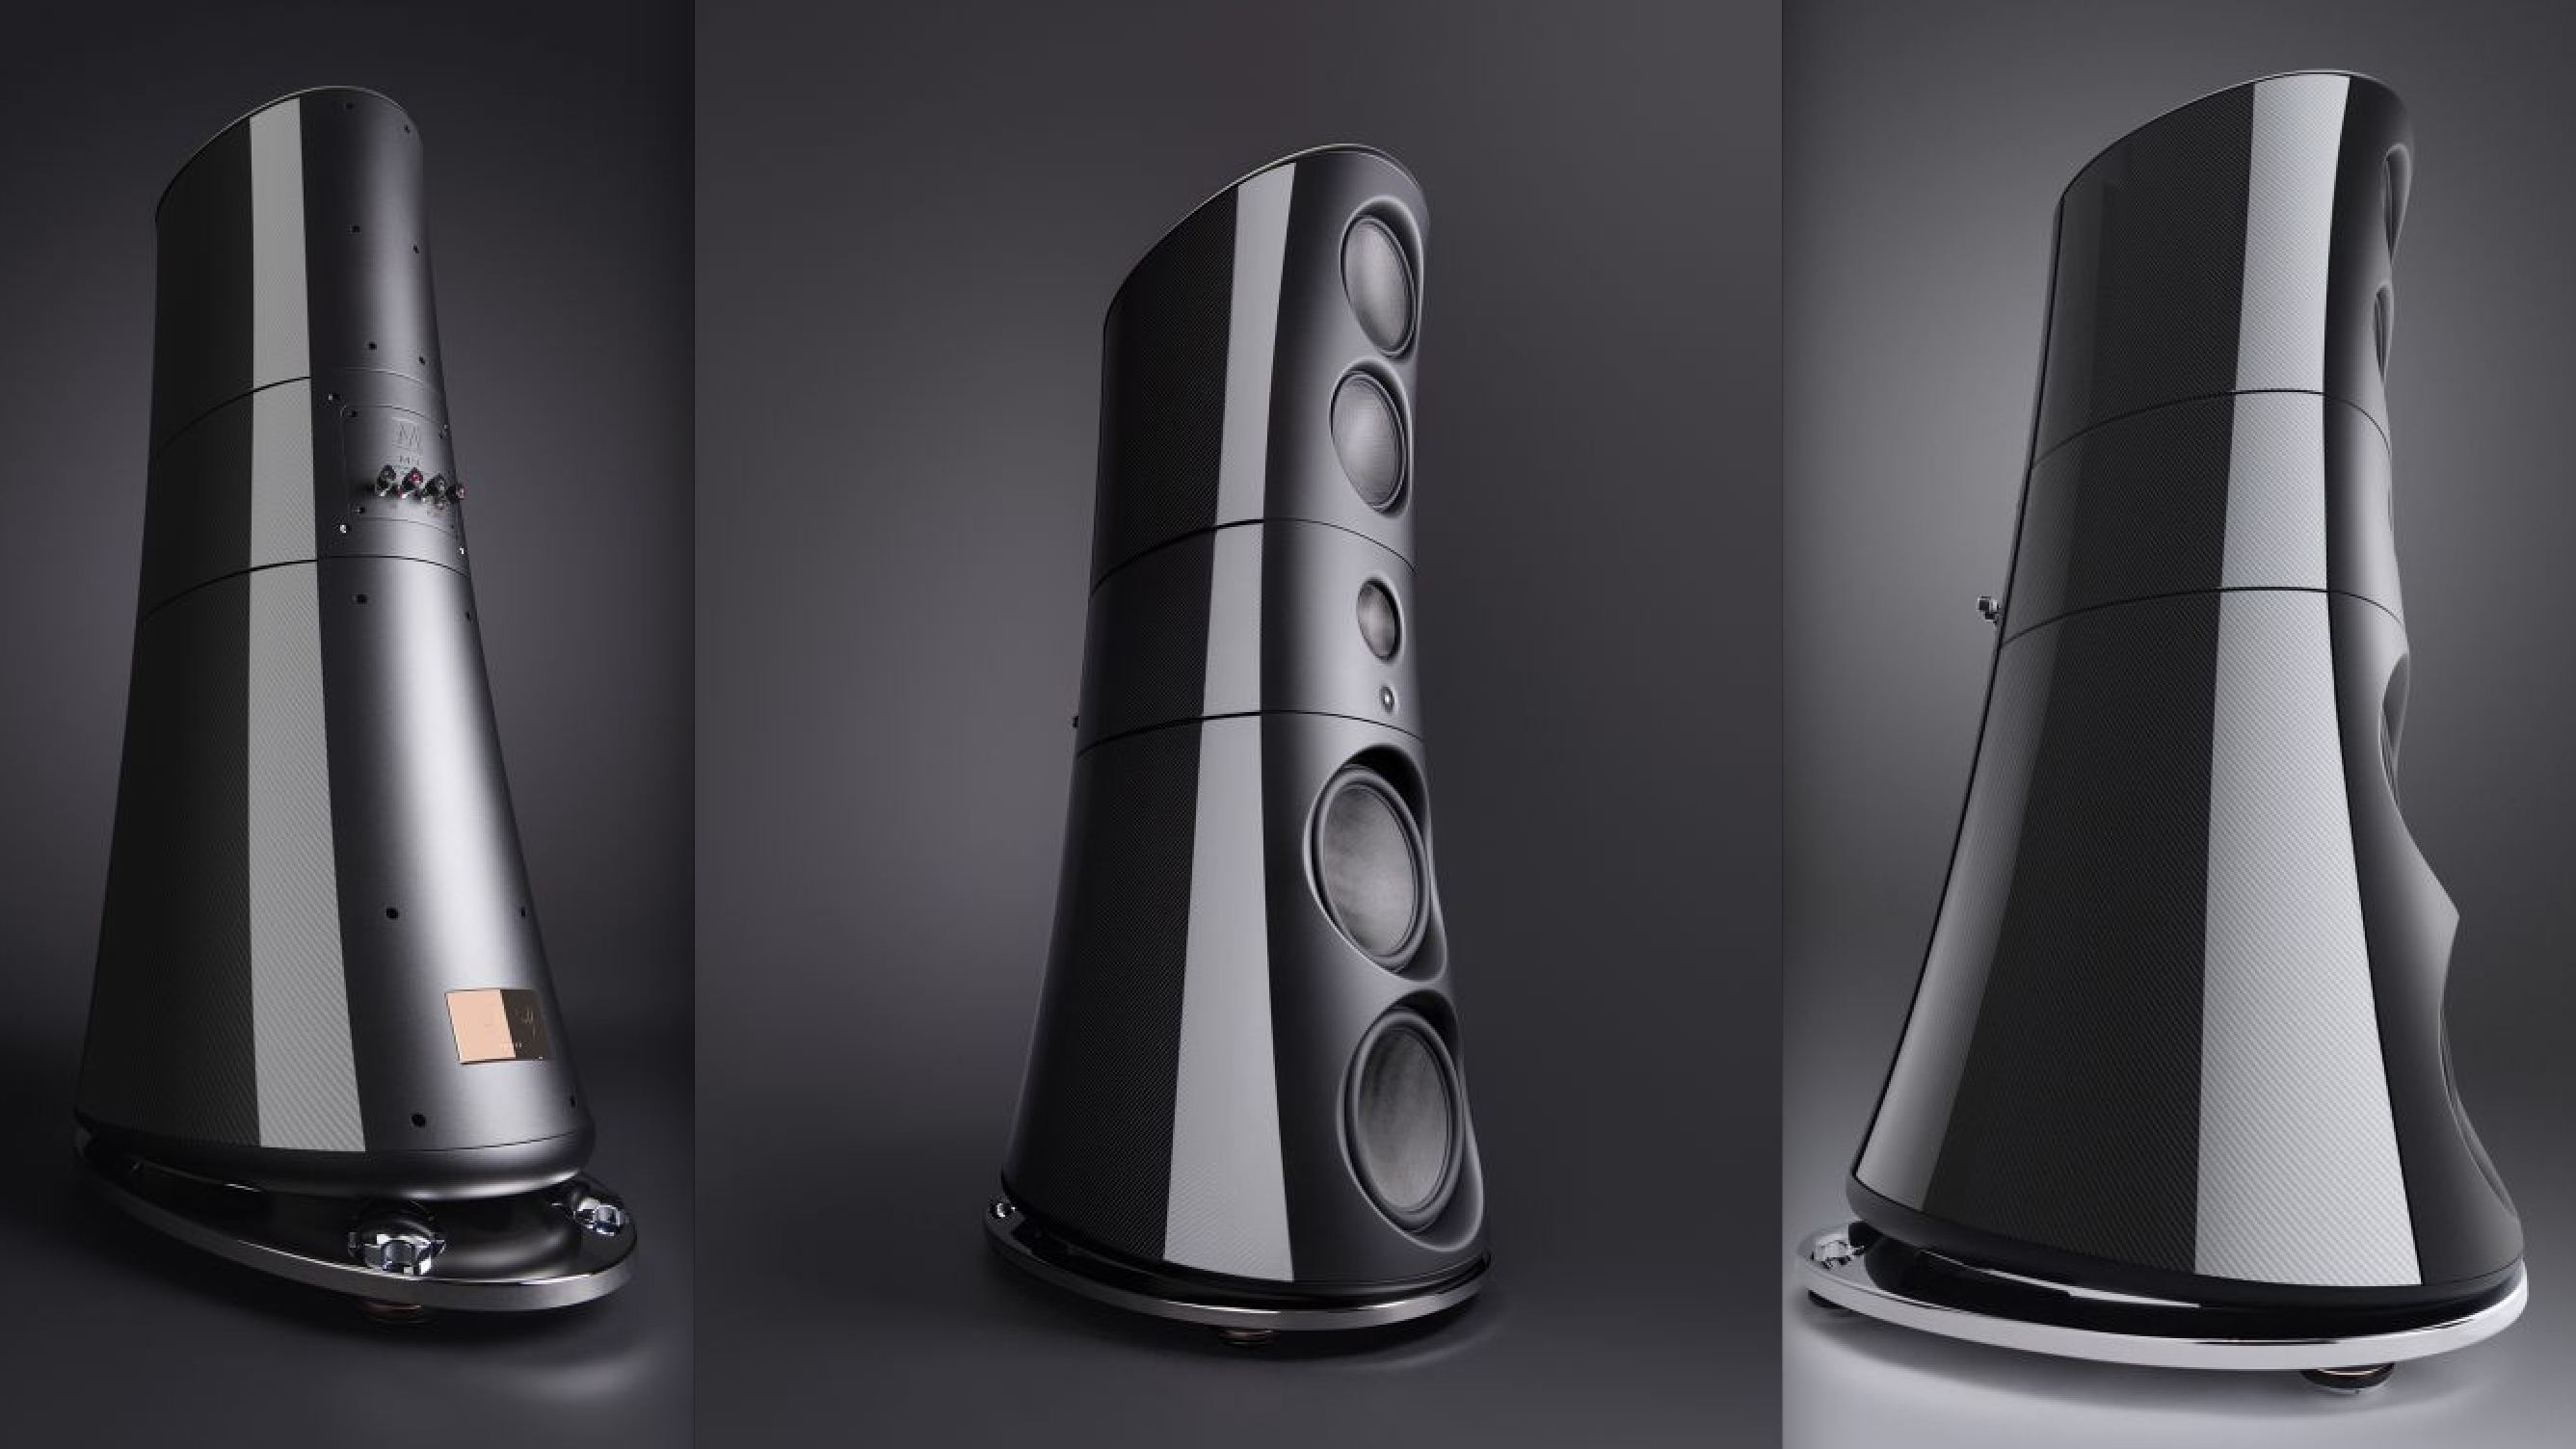 Magico's ultra-high-end M9 flagship floorstanders cost almost £1m